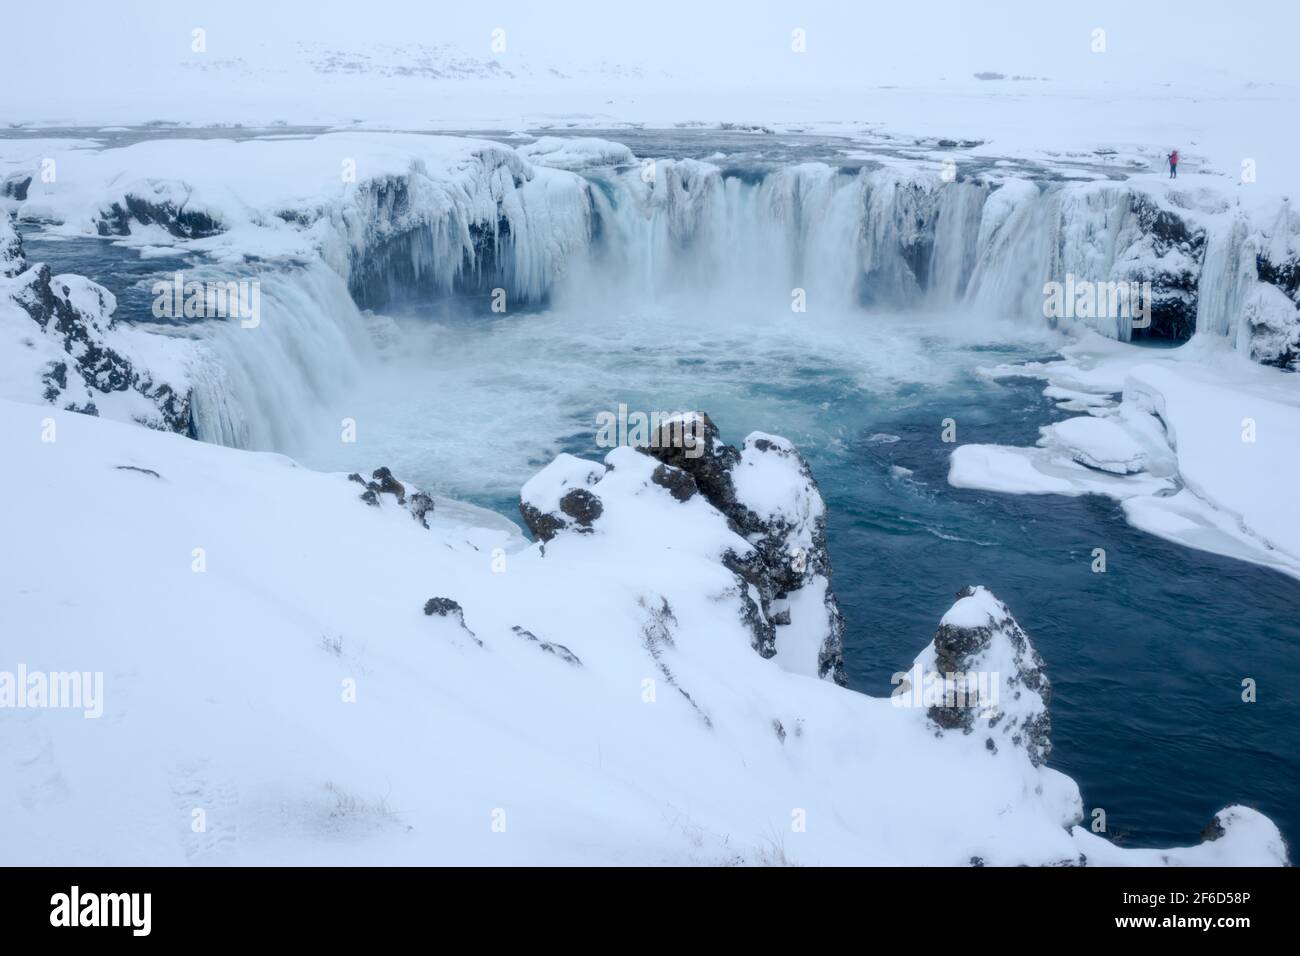 Goðafoss waterfall complex with a photographer near to the edge during winter conditions showing the 12 metre drop full of ice features on the  river Stock Photo